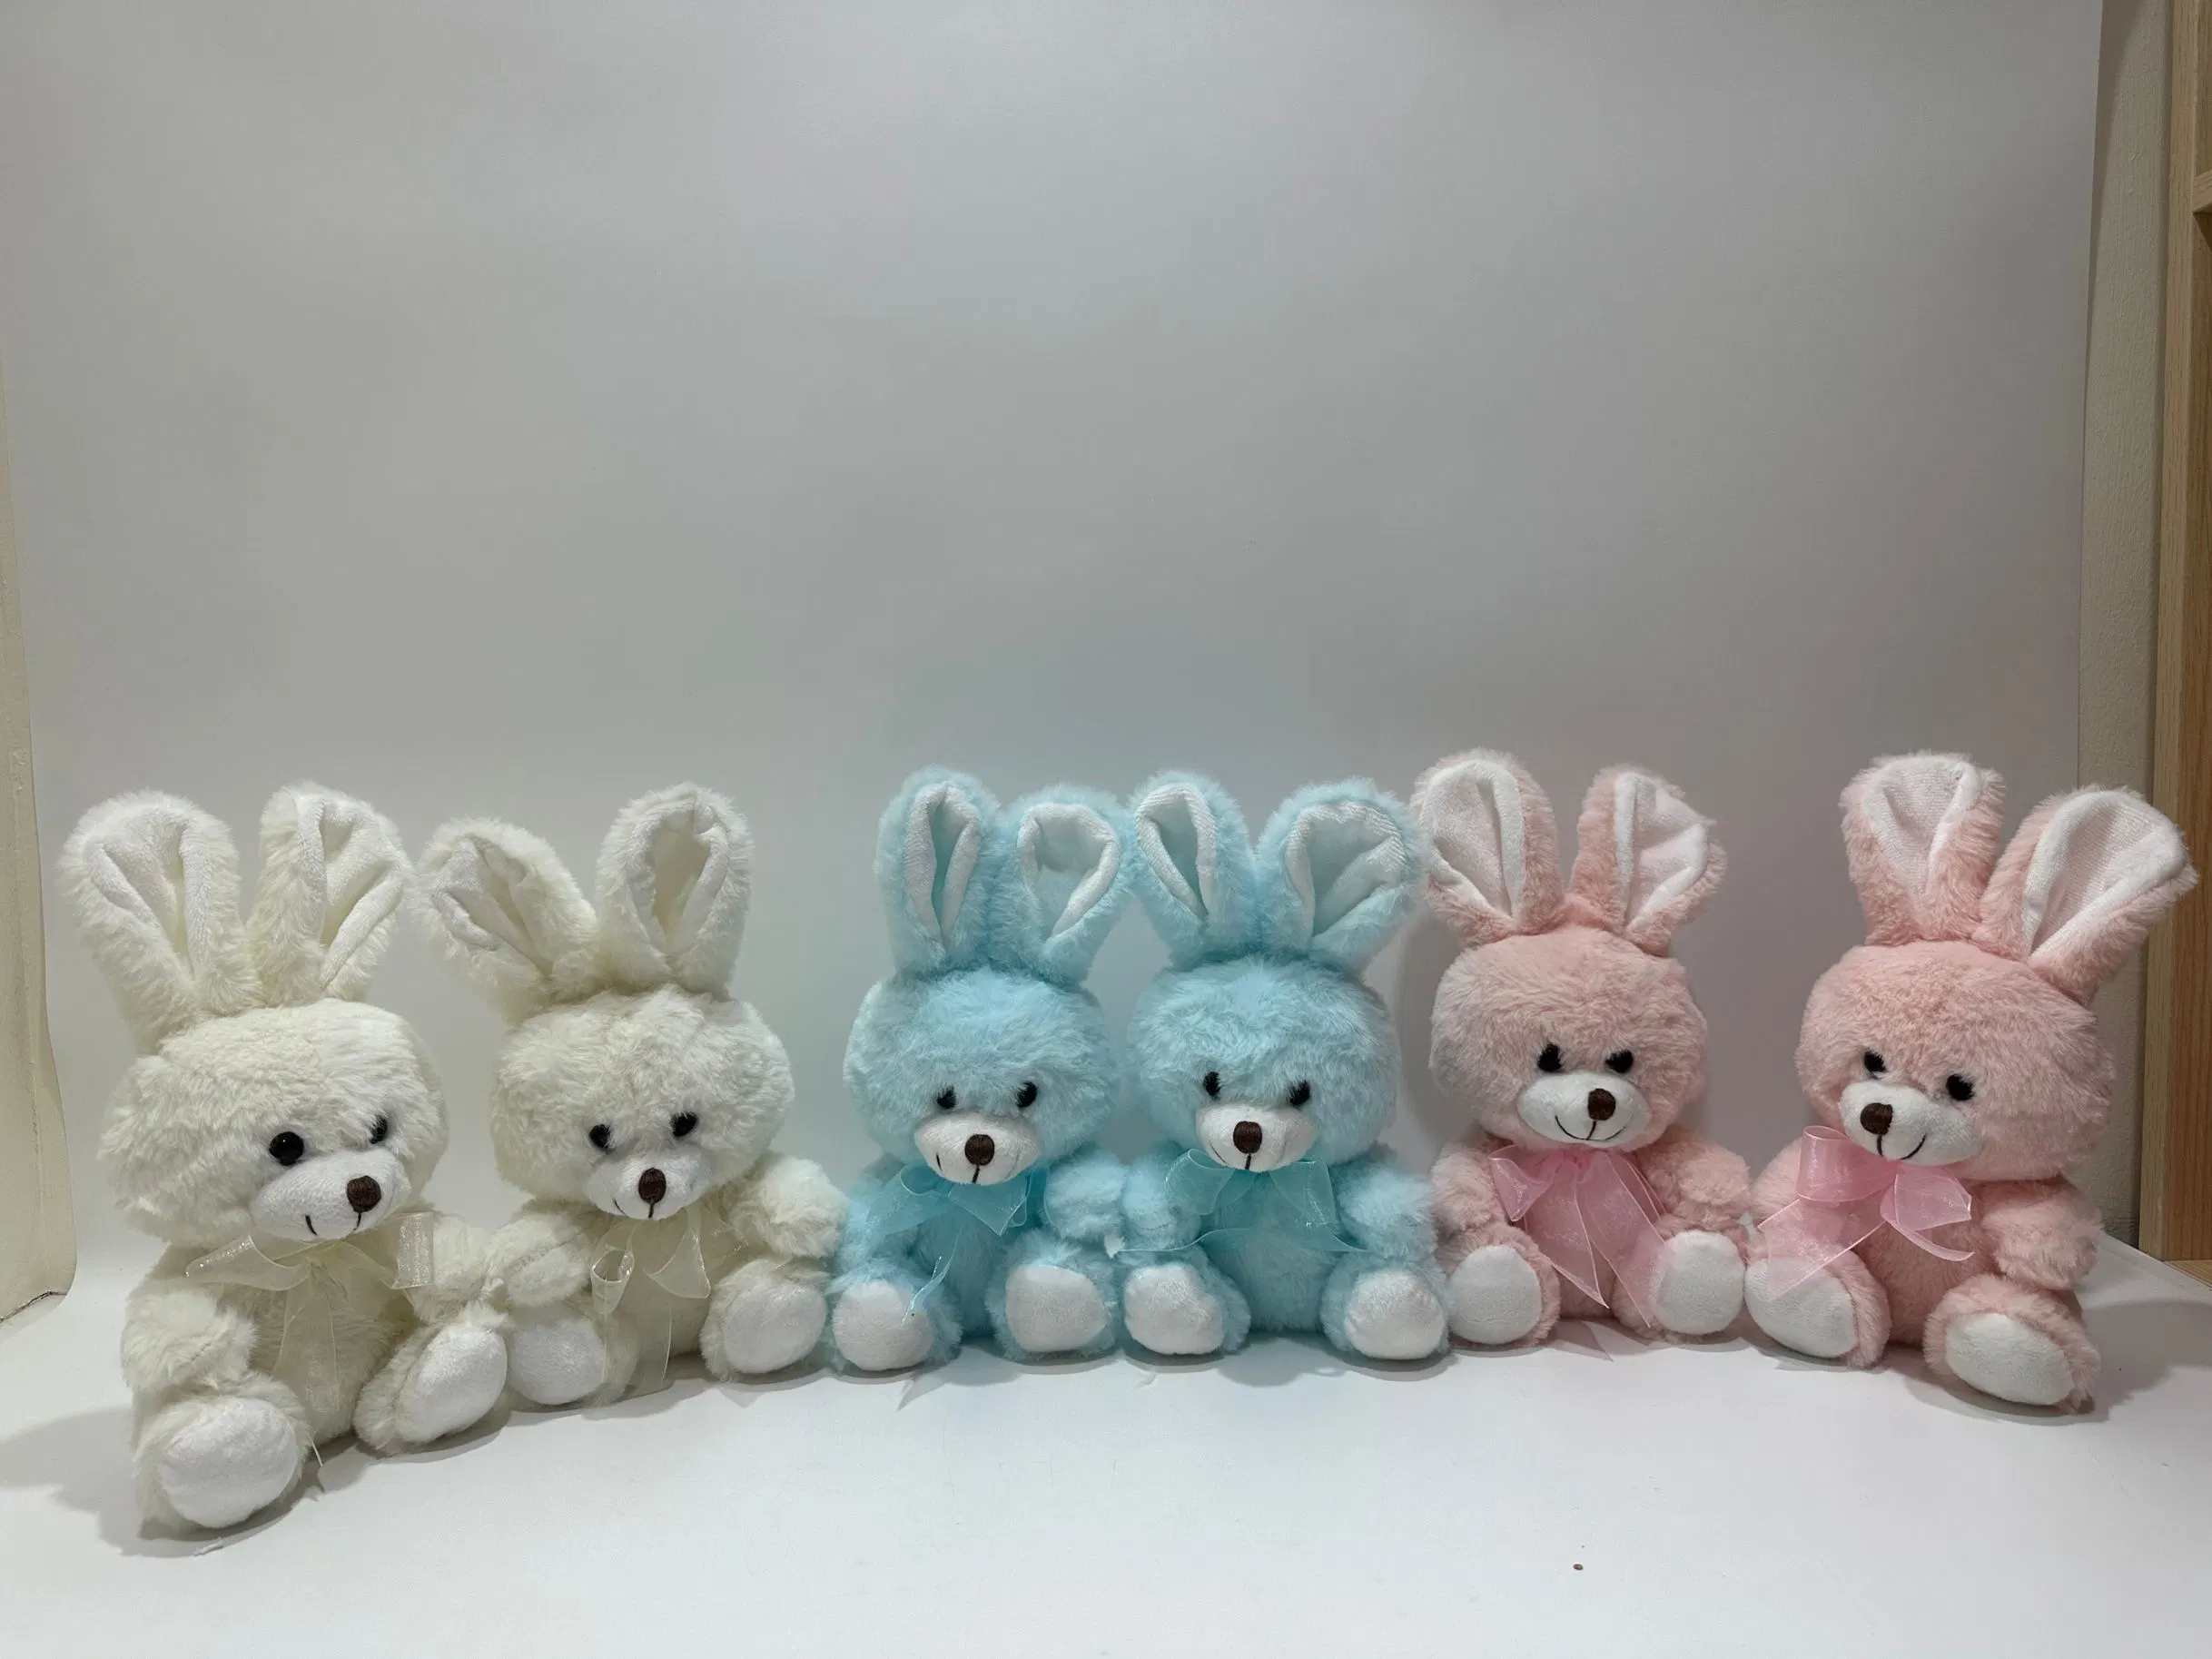 20cm 8" Easter Plush Toy Bunny Rabbit Stuffed Animal with Bowtie